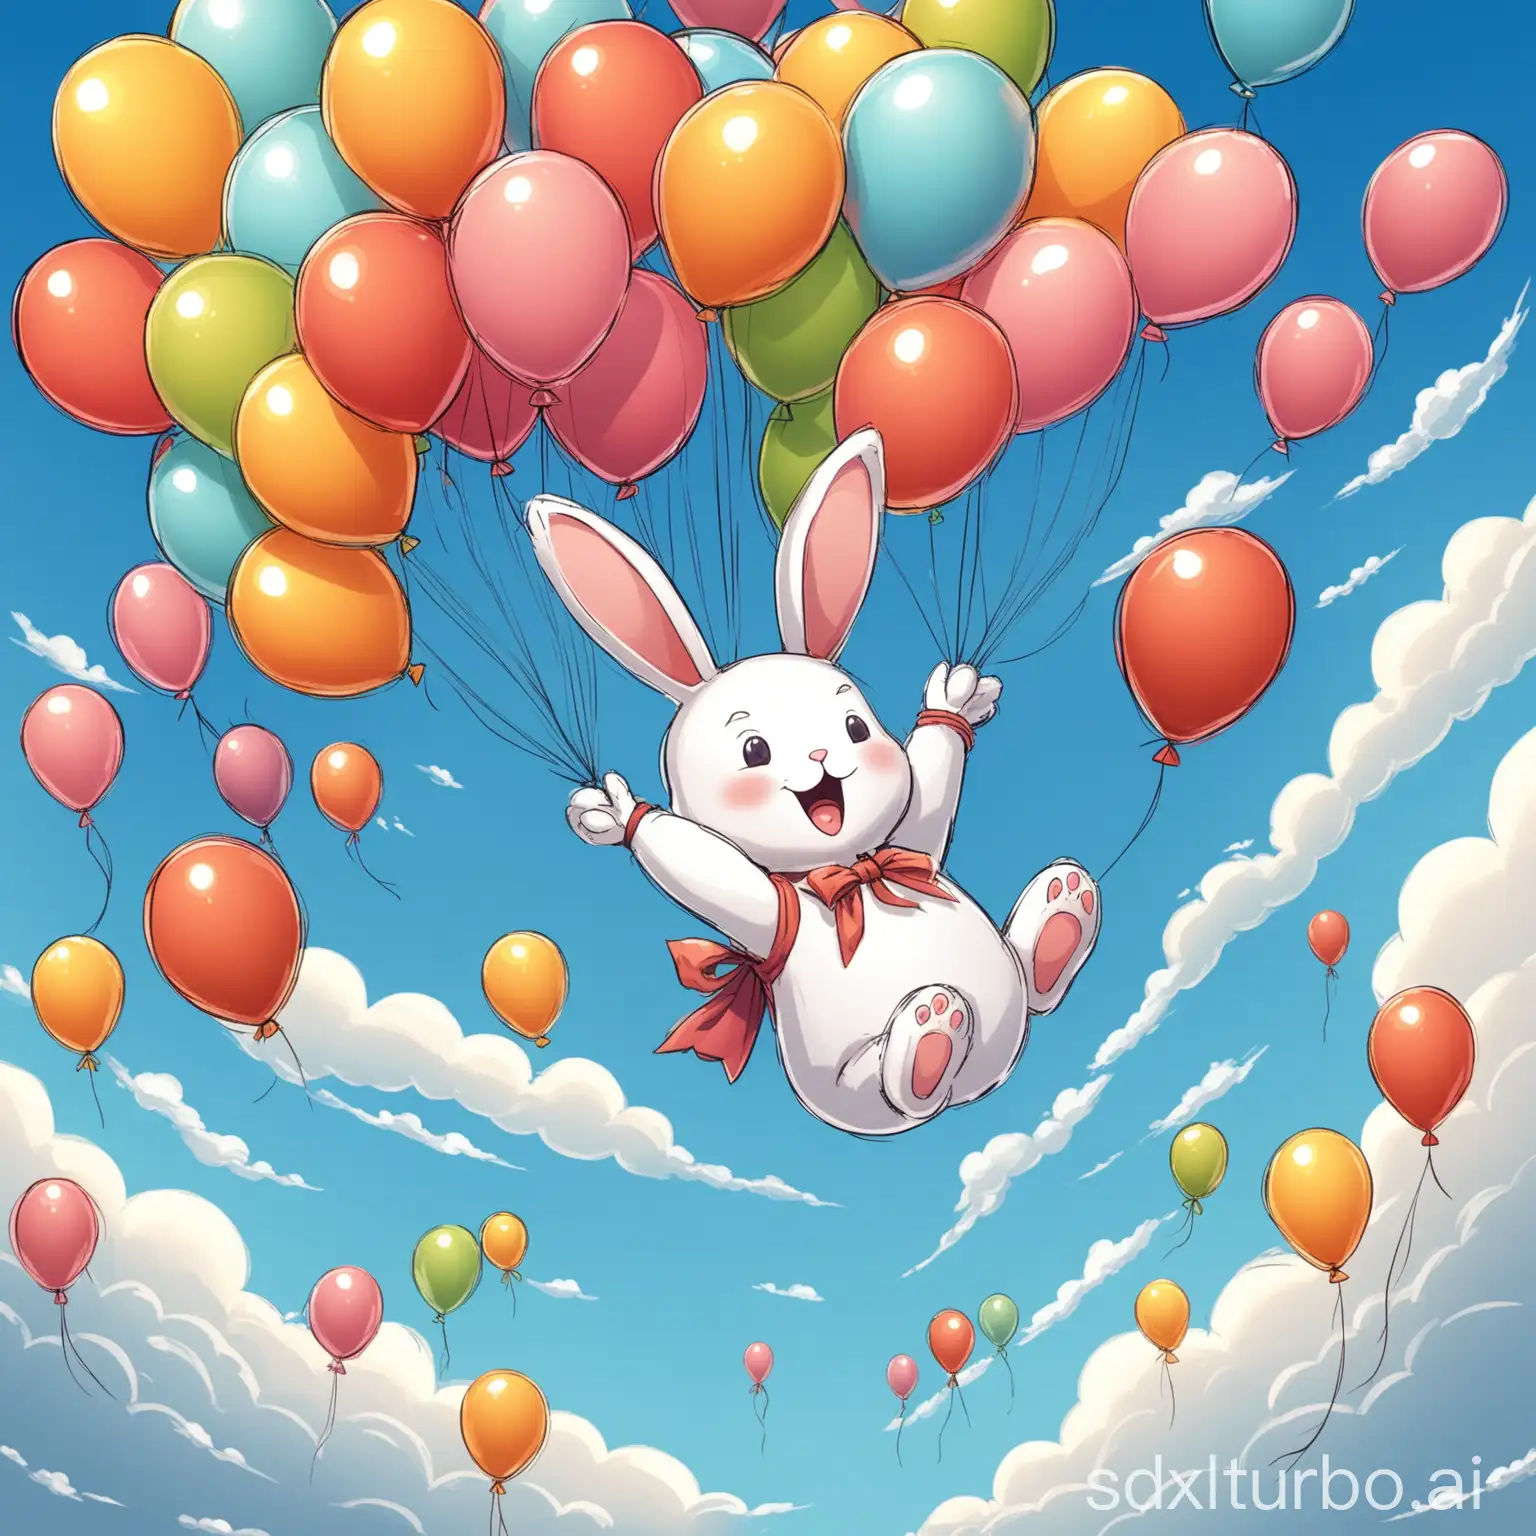 A cartoon rabbit soaring in the sky with balloons tied to its body